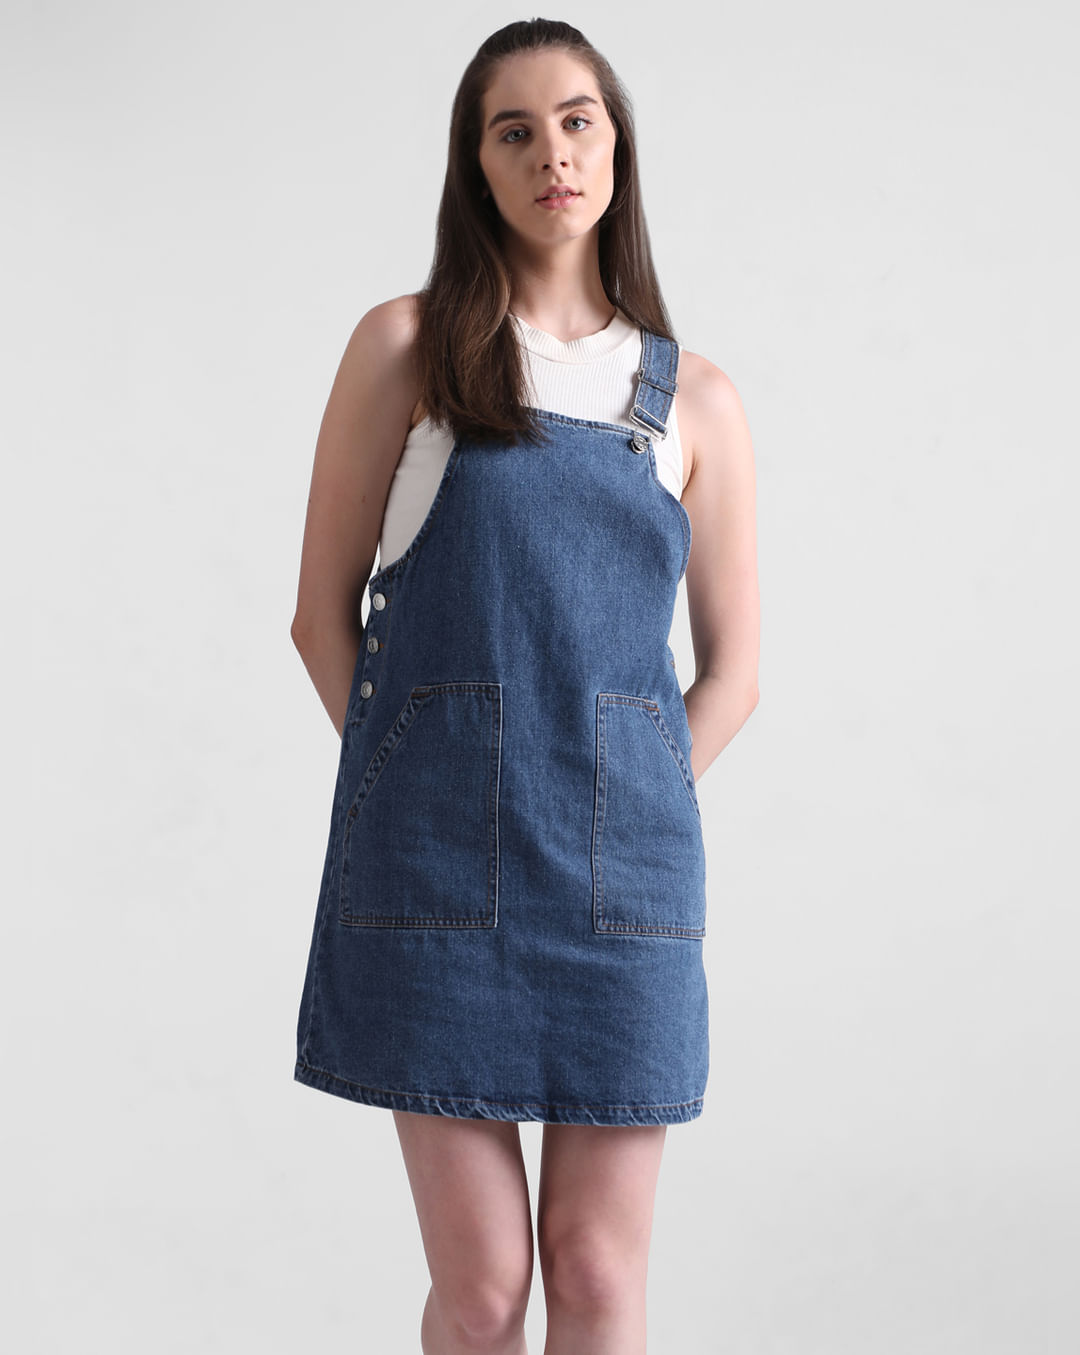 Convert Left Over Fabric into Skirt Dungaree